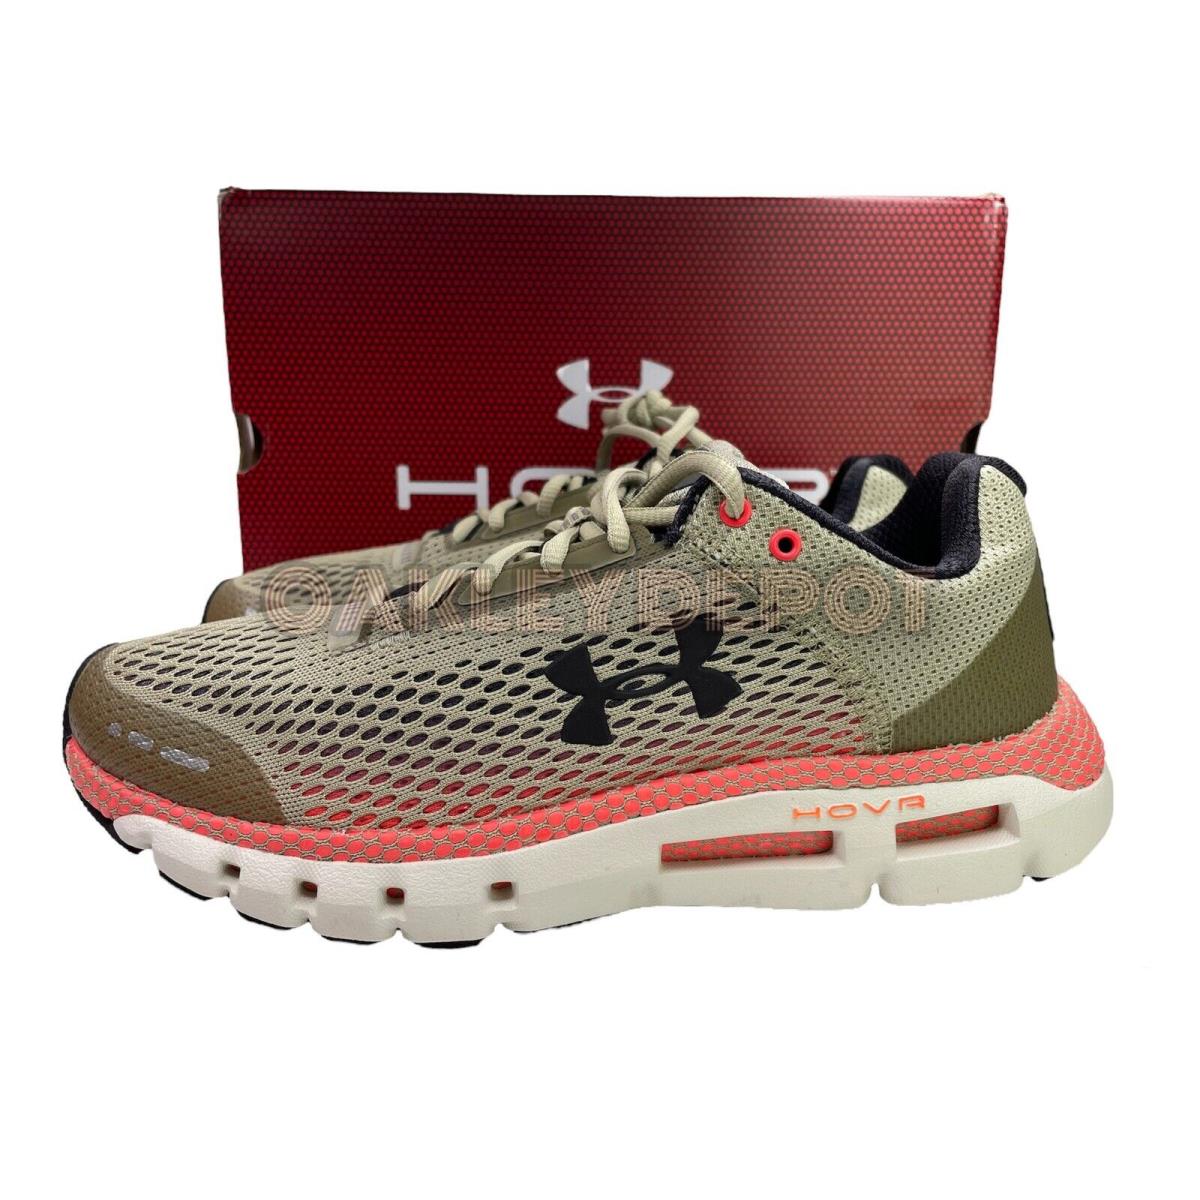 Under Armour Horv Infinite Mens Running Shoes Size US 7 3021395